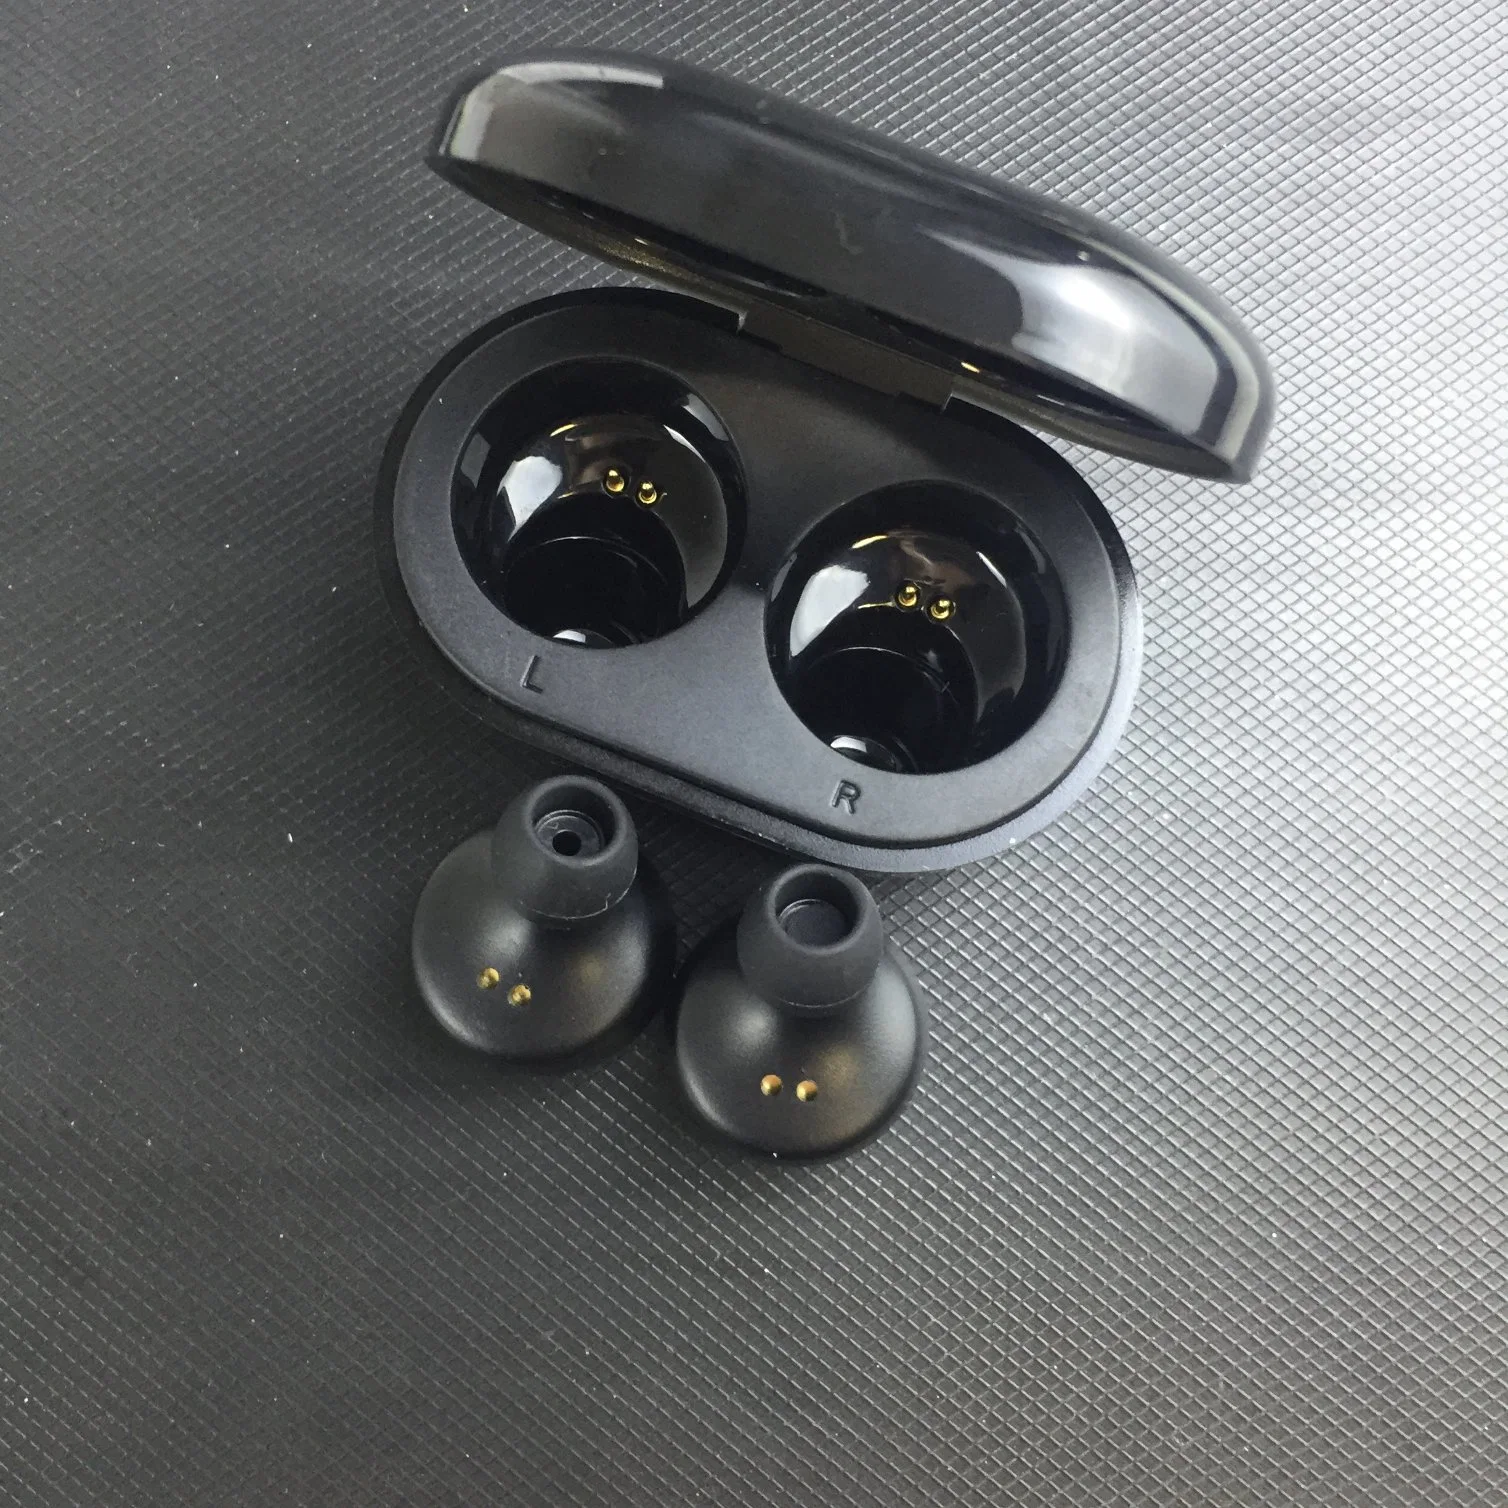 Original 1: 1 Best Quality Wireless Earphones Headset Comes with Pop-up Windows for Airpode Max Headphones Air PRO Pods